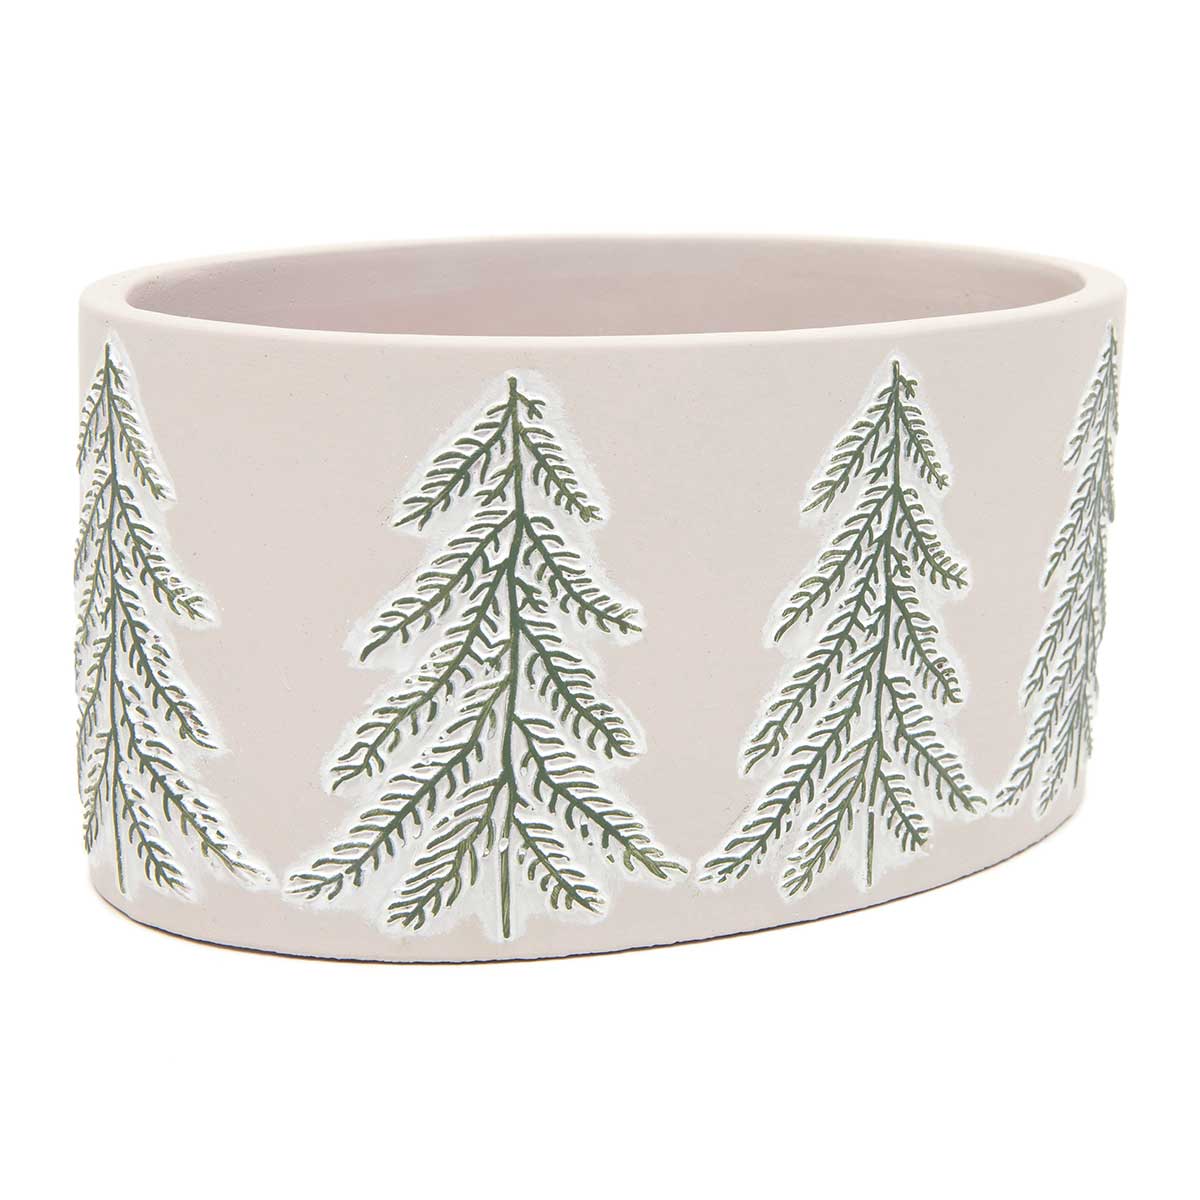 POT WINTER GREEN TREE OVAL 8.5IN X 5IN X 4IN CREAM/GREEN - Click Image to Close